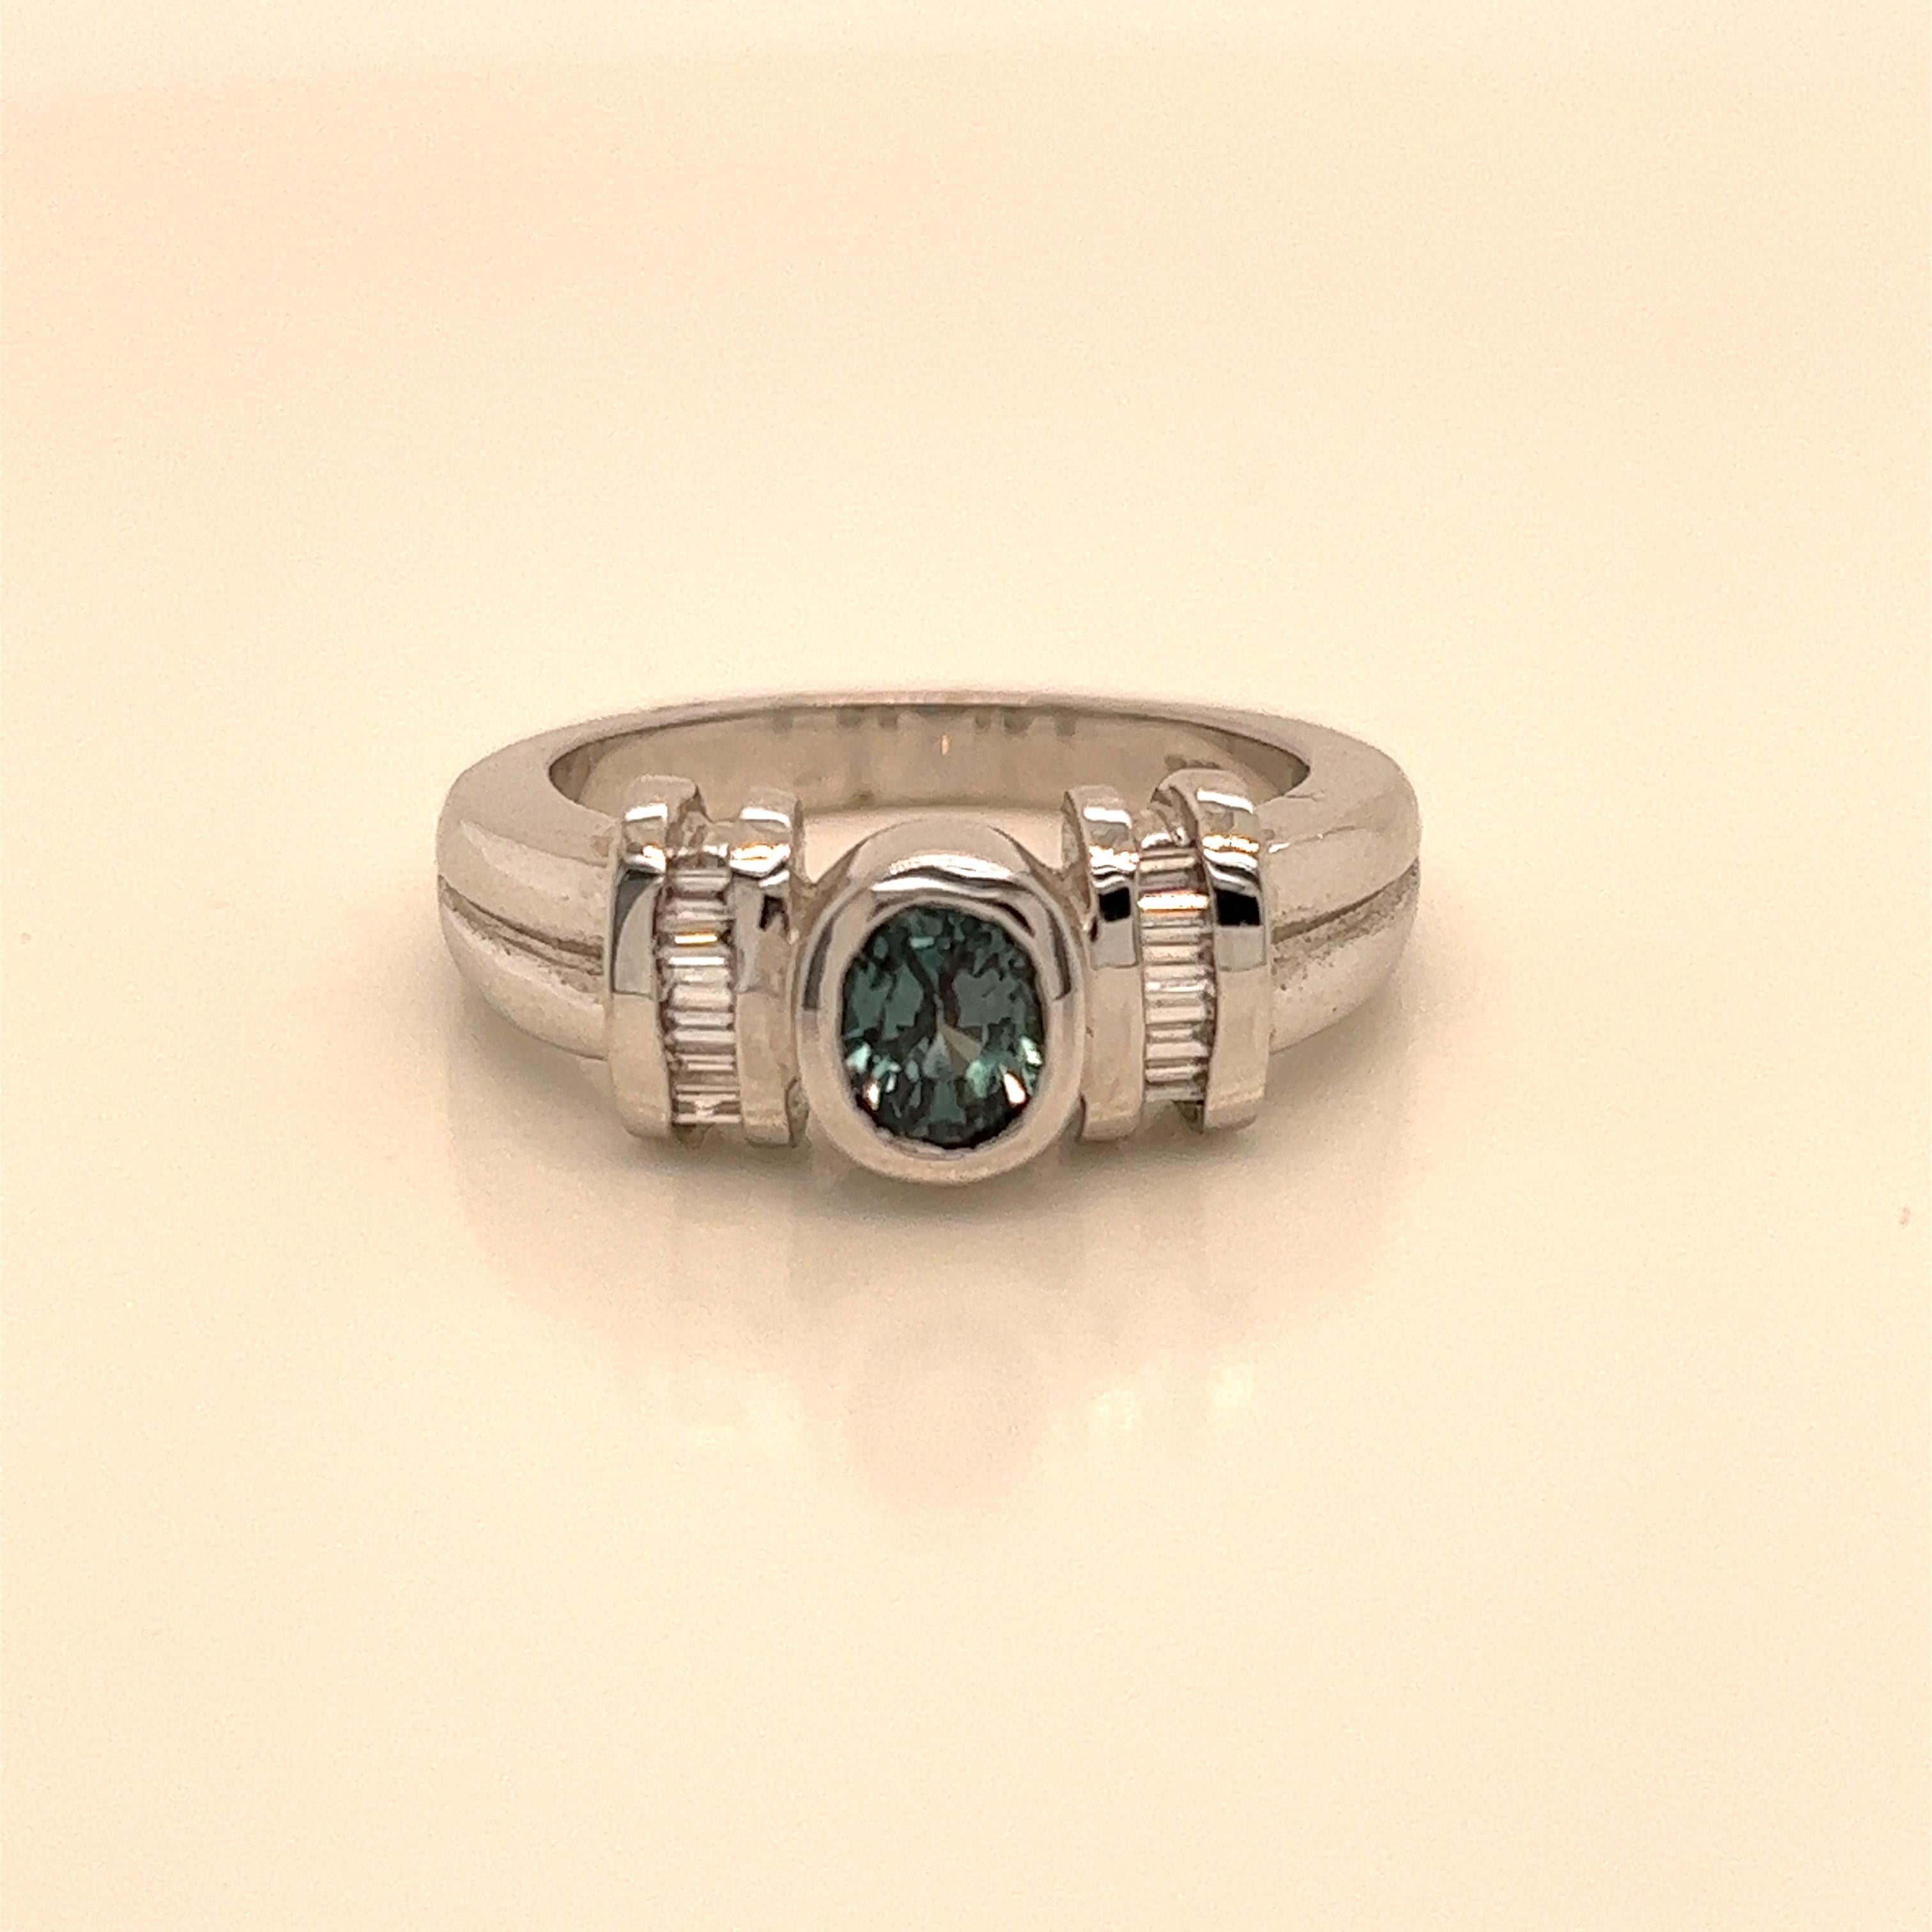 This is a gorgeous natural AAA quality Oval Alexandrite with Baguette diamonds that is set in solid 18K white gold. This ring features a natural 1.11 carat oval alexandrite that is certified by the Gemological Institute of America (GIA). The ring is